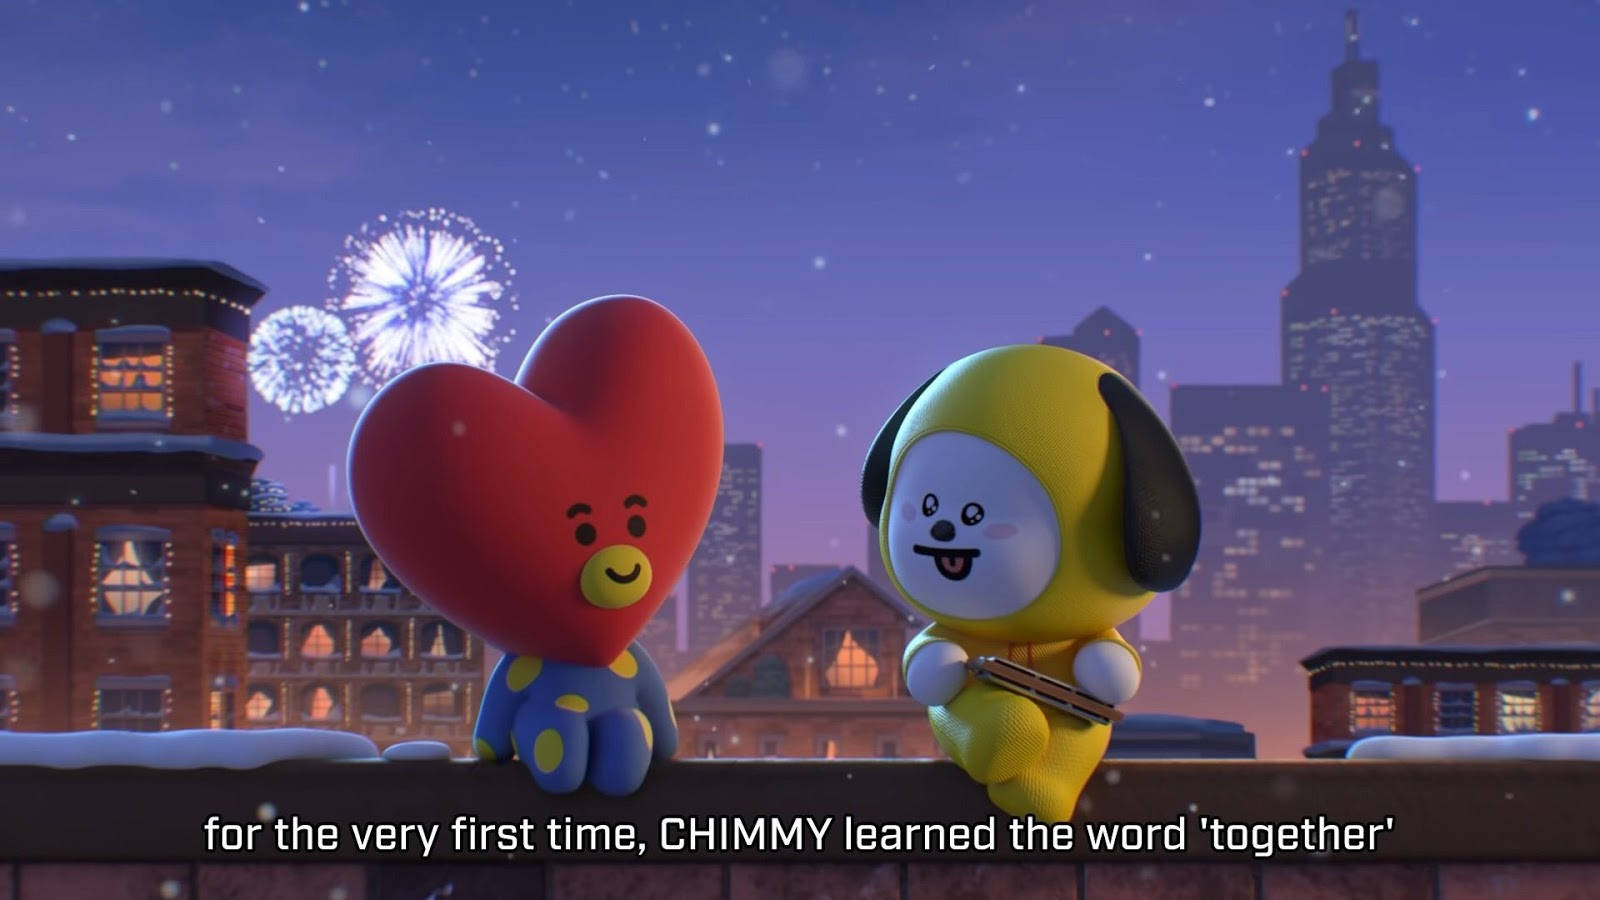 Tata And Chimmy Bt21